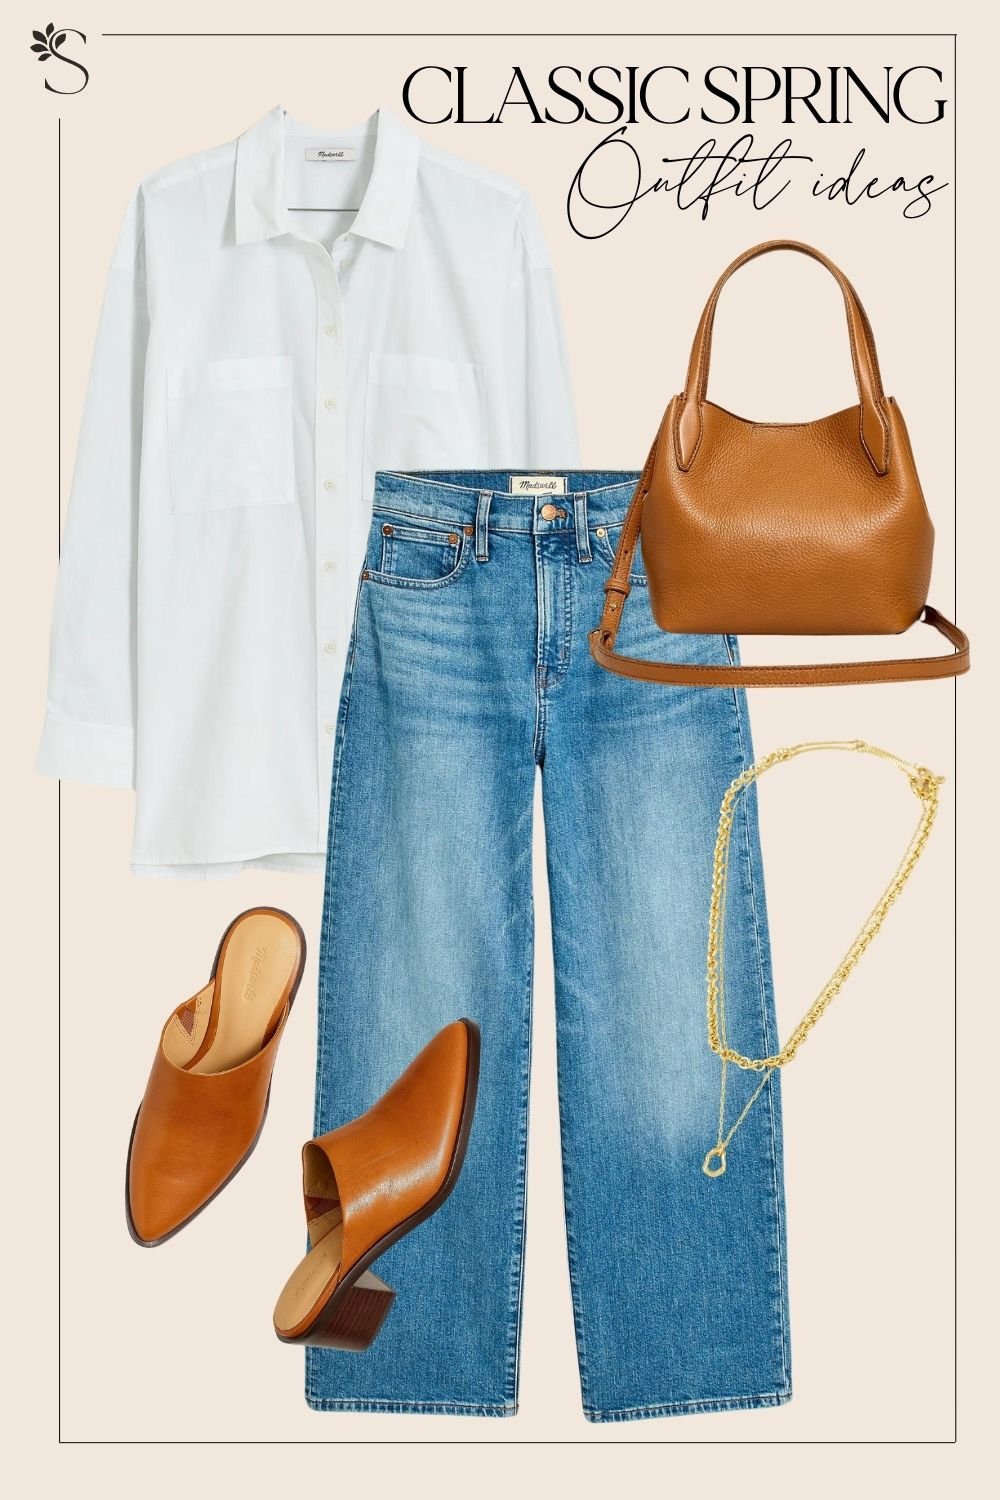 25 Outfit Ideas From Madewell's New Spring Clothes